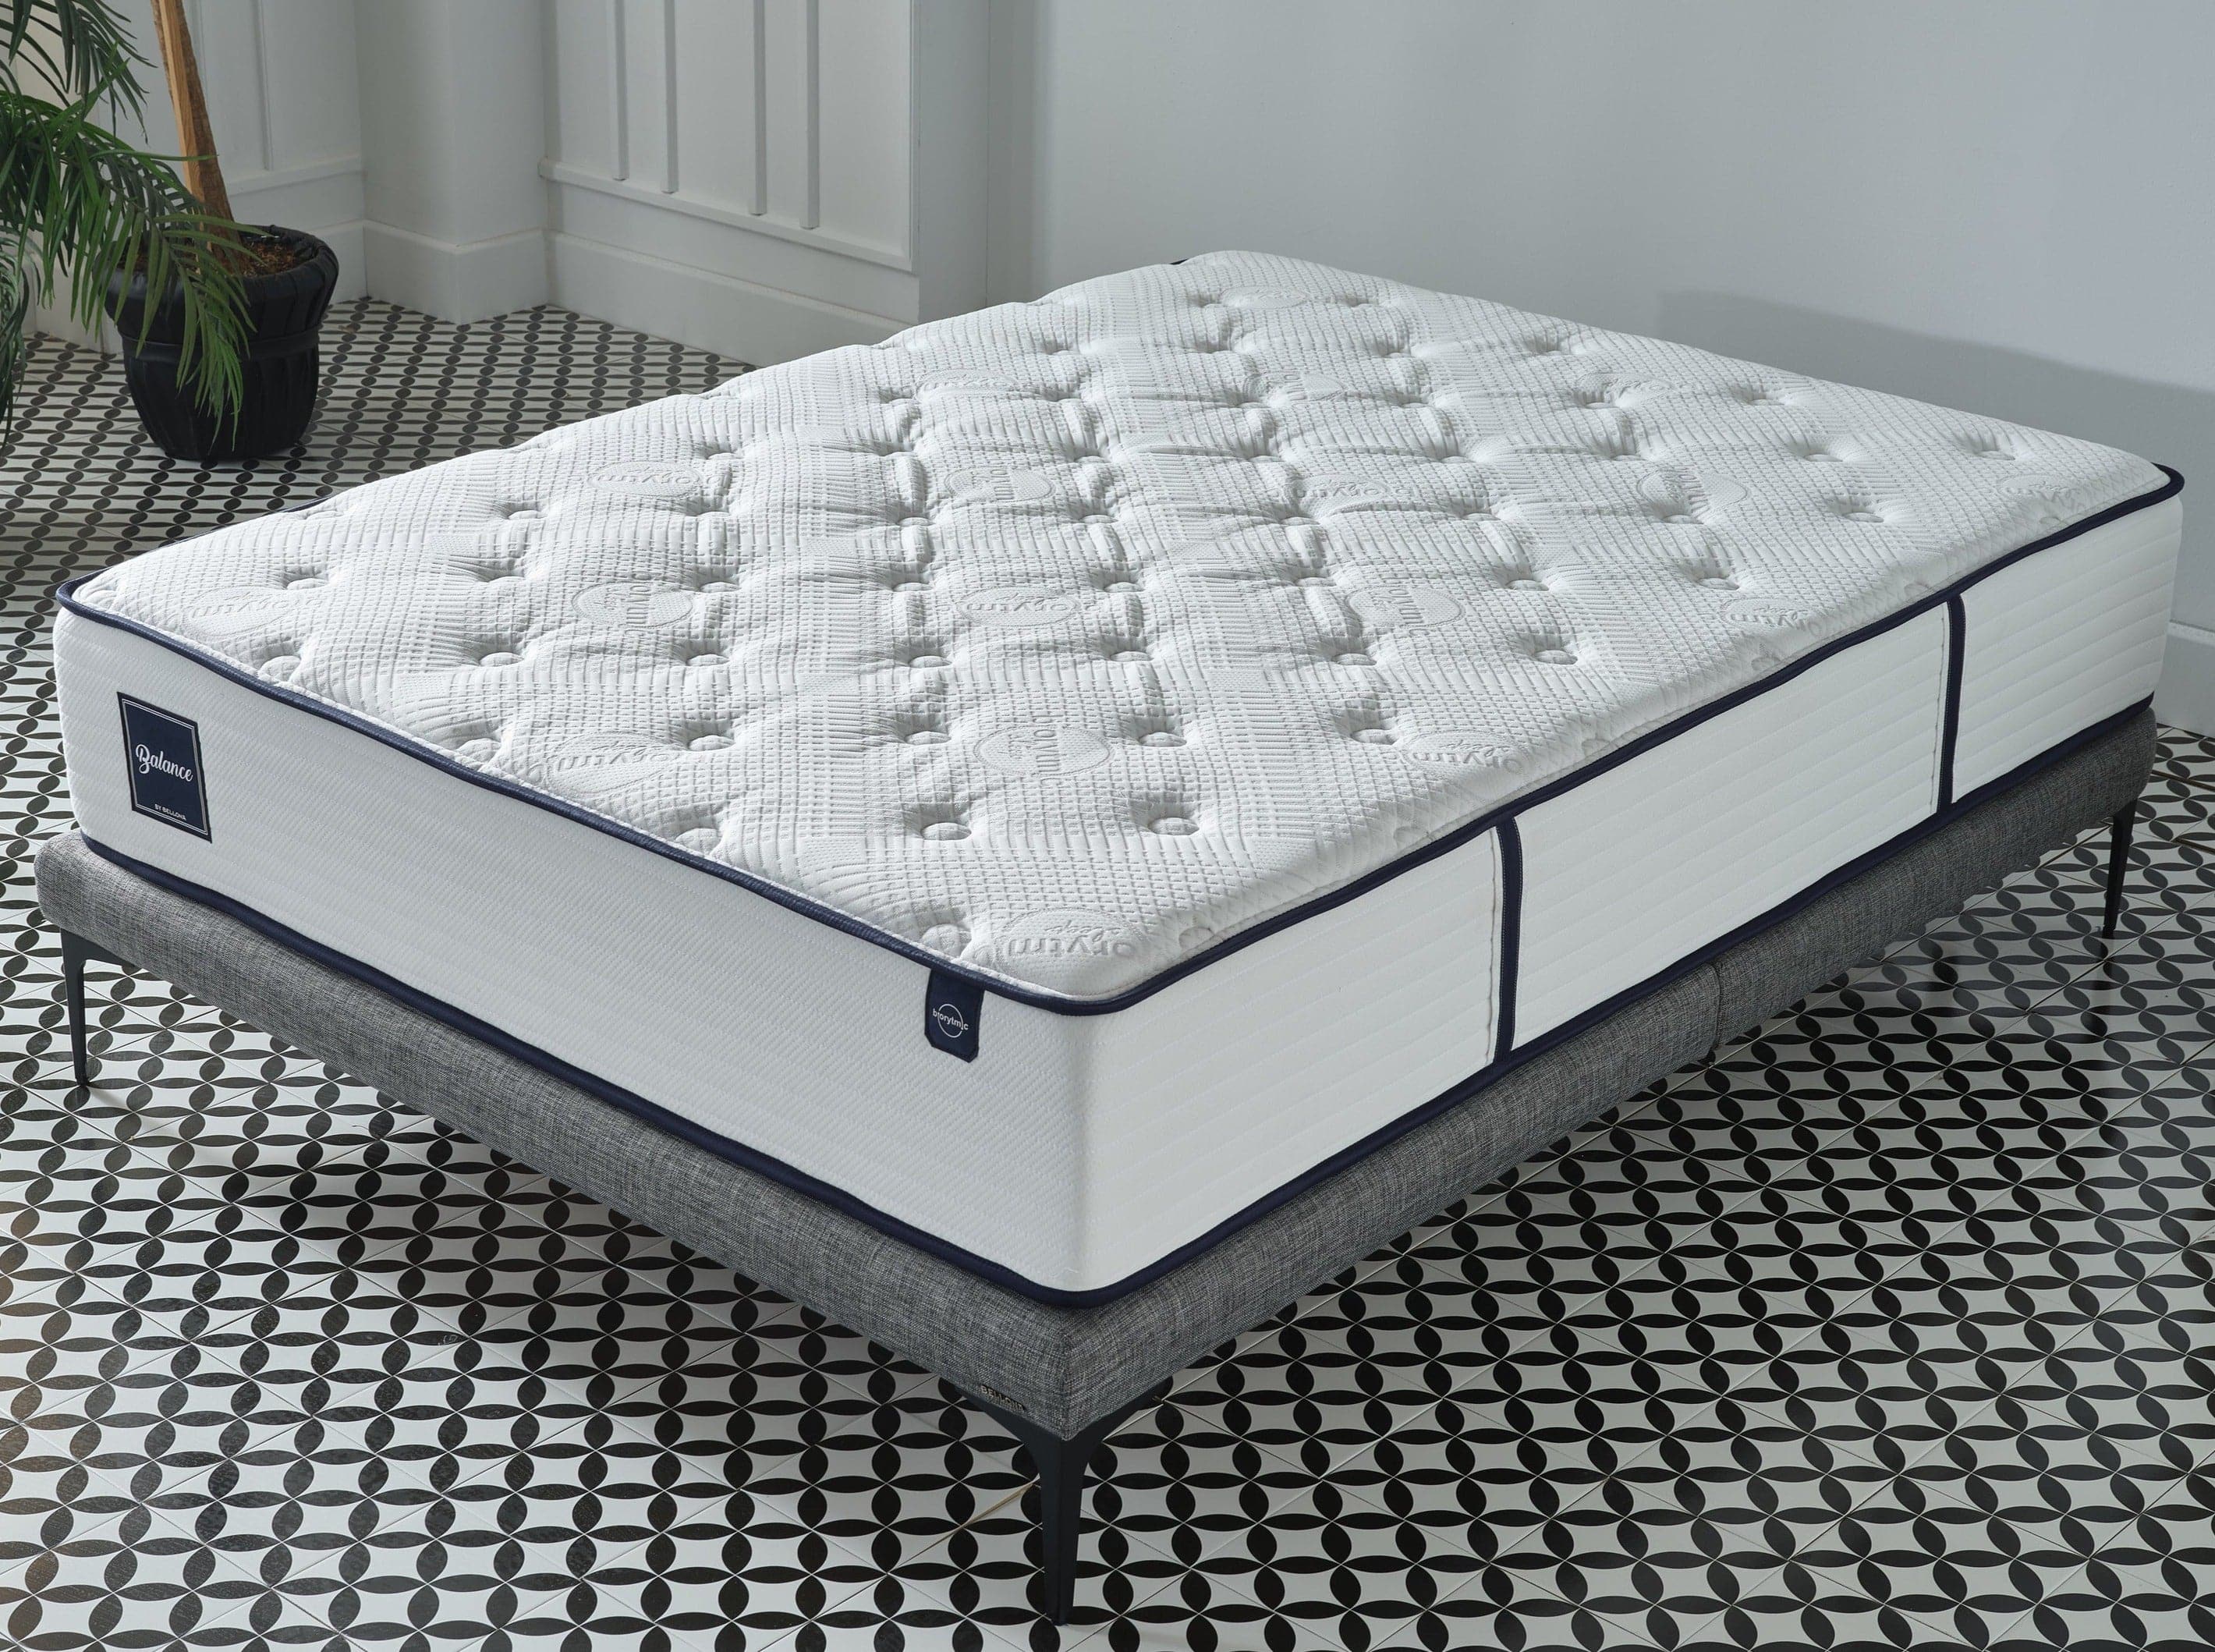 Buttersoft - Magic- Semi Othopedic Mattress, Ideal for All Ages